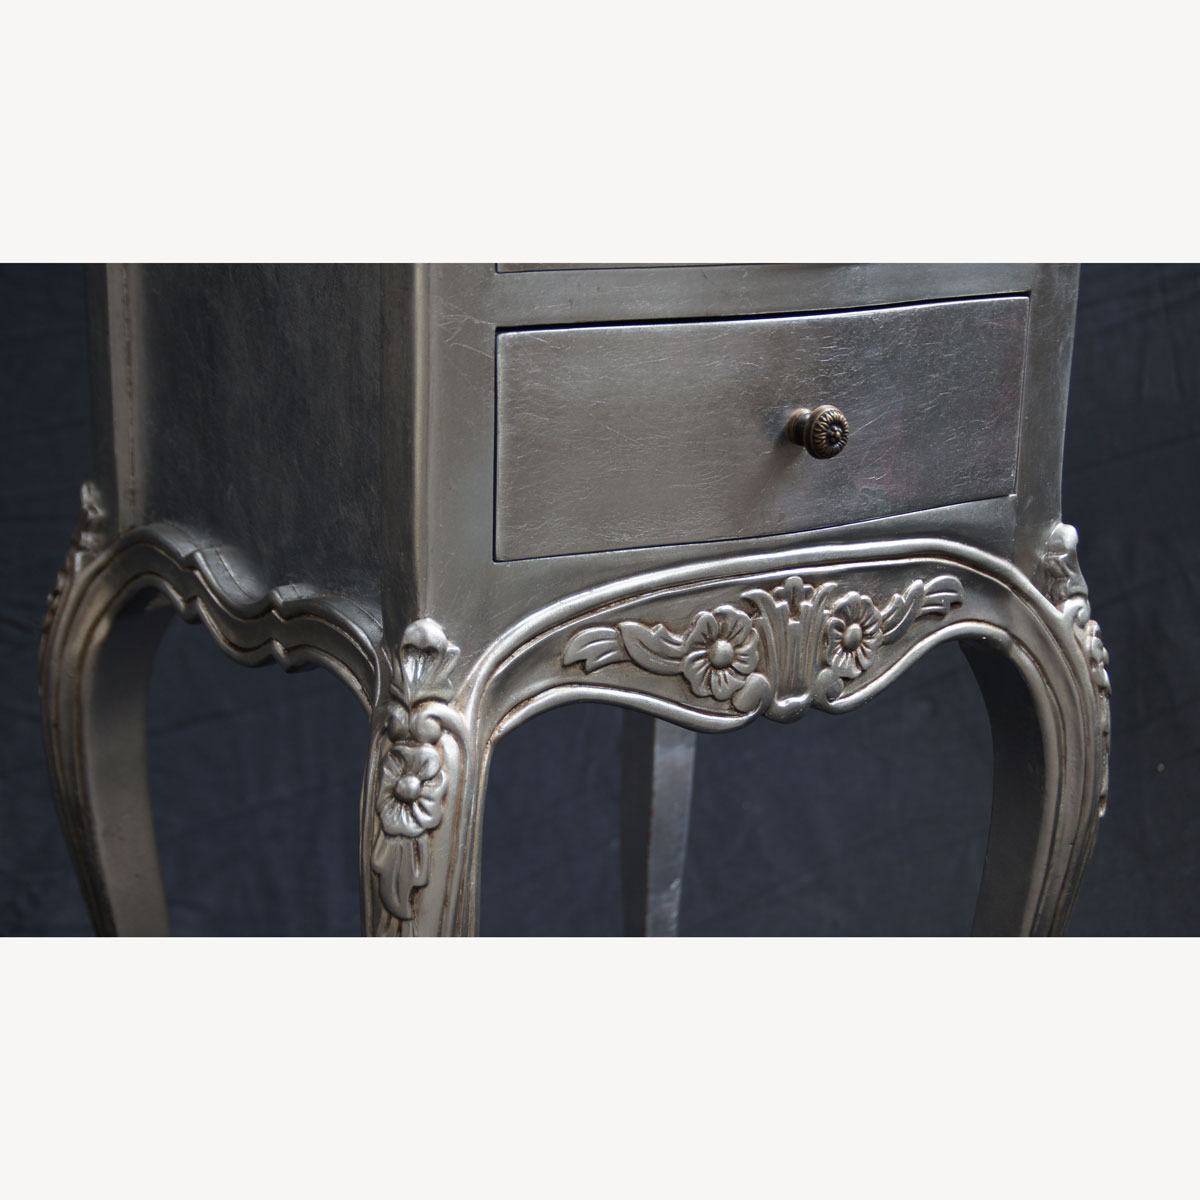 Beautiful Parisian Ornate Two Drawer Lamp Side Table Or Bedside Cabinet Shown In Silver Leaf 5 - Hampshire Barn Interiors - Beautiful Parisian Ornate Two Drawer Lamp Side Table Or Bedside Cabinet Shown In Silver Leaf -